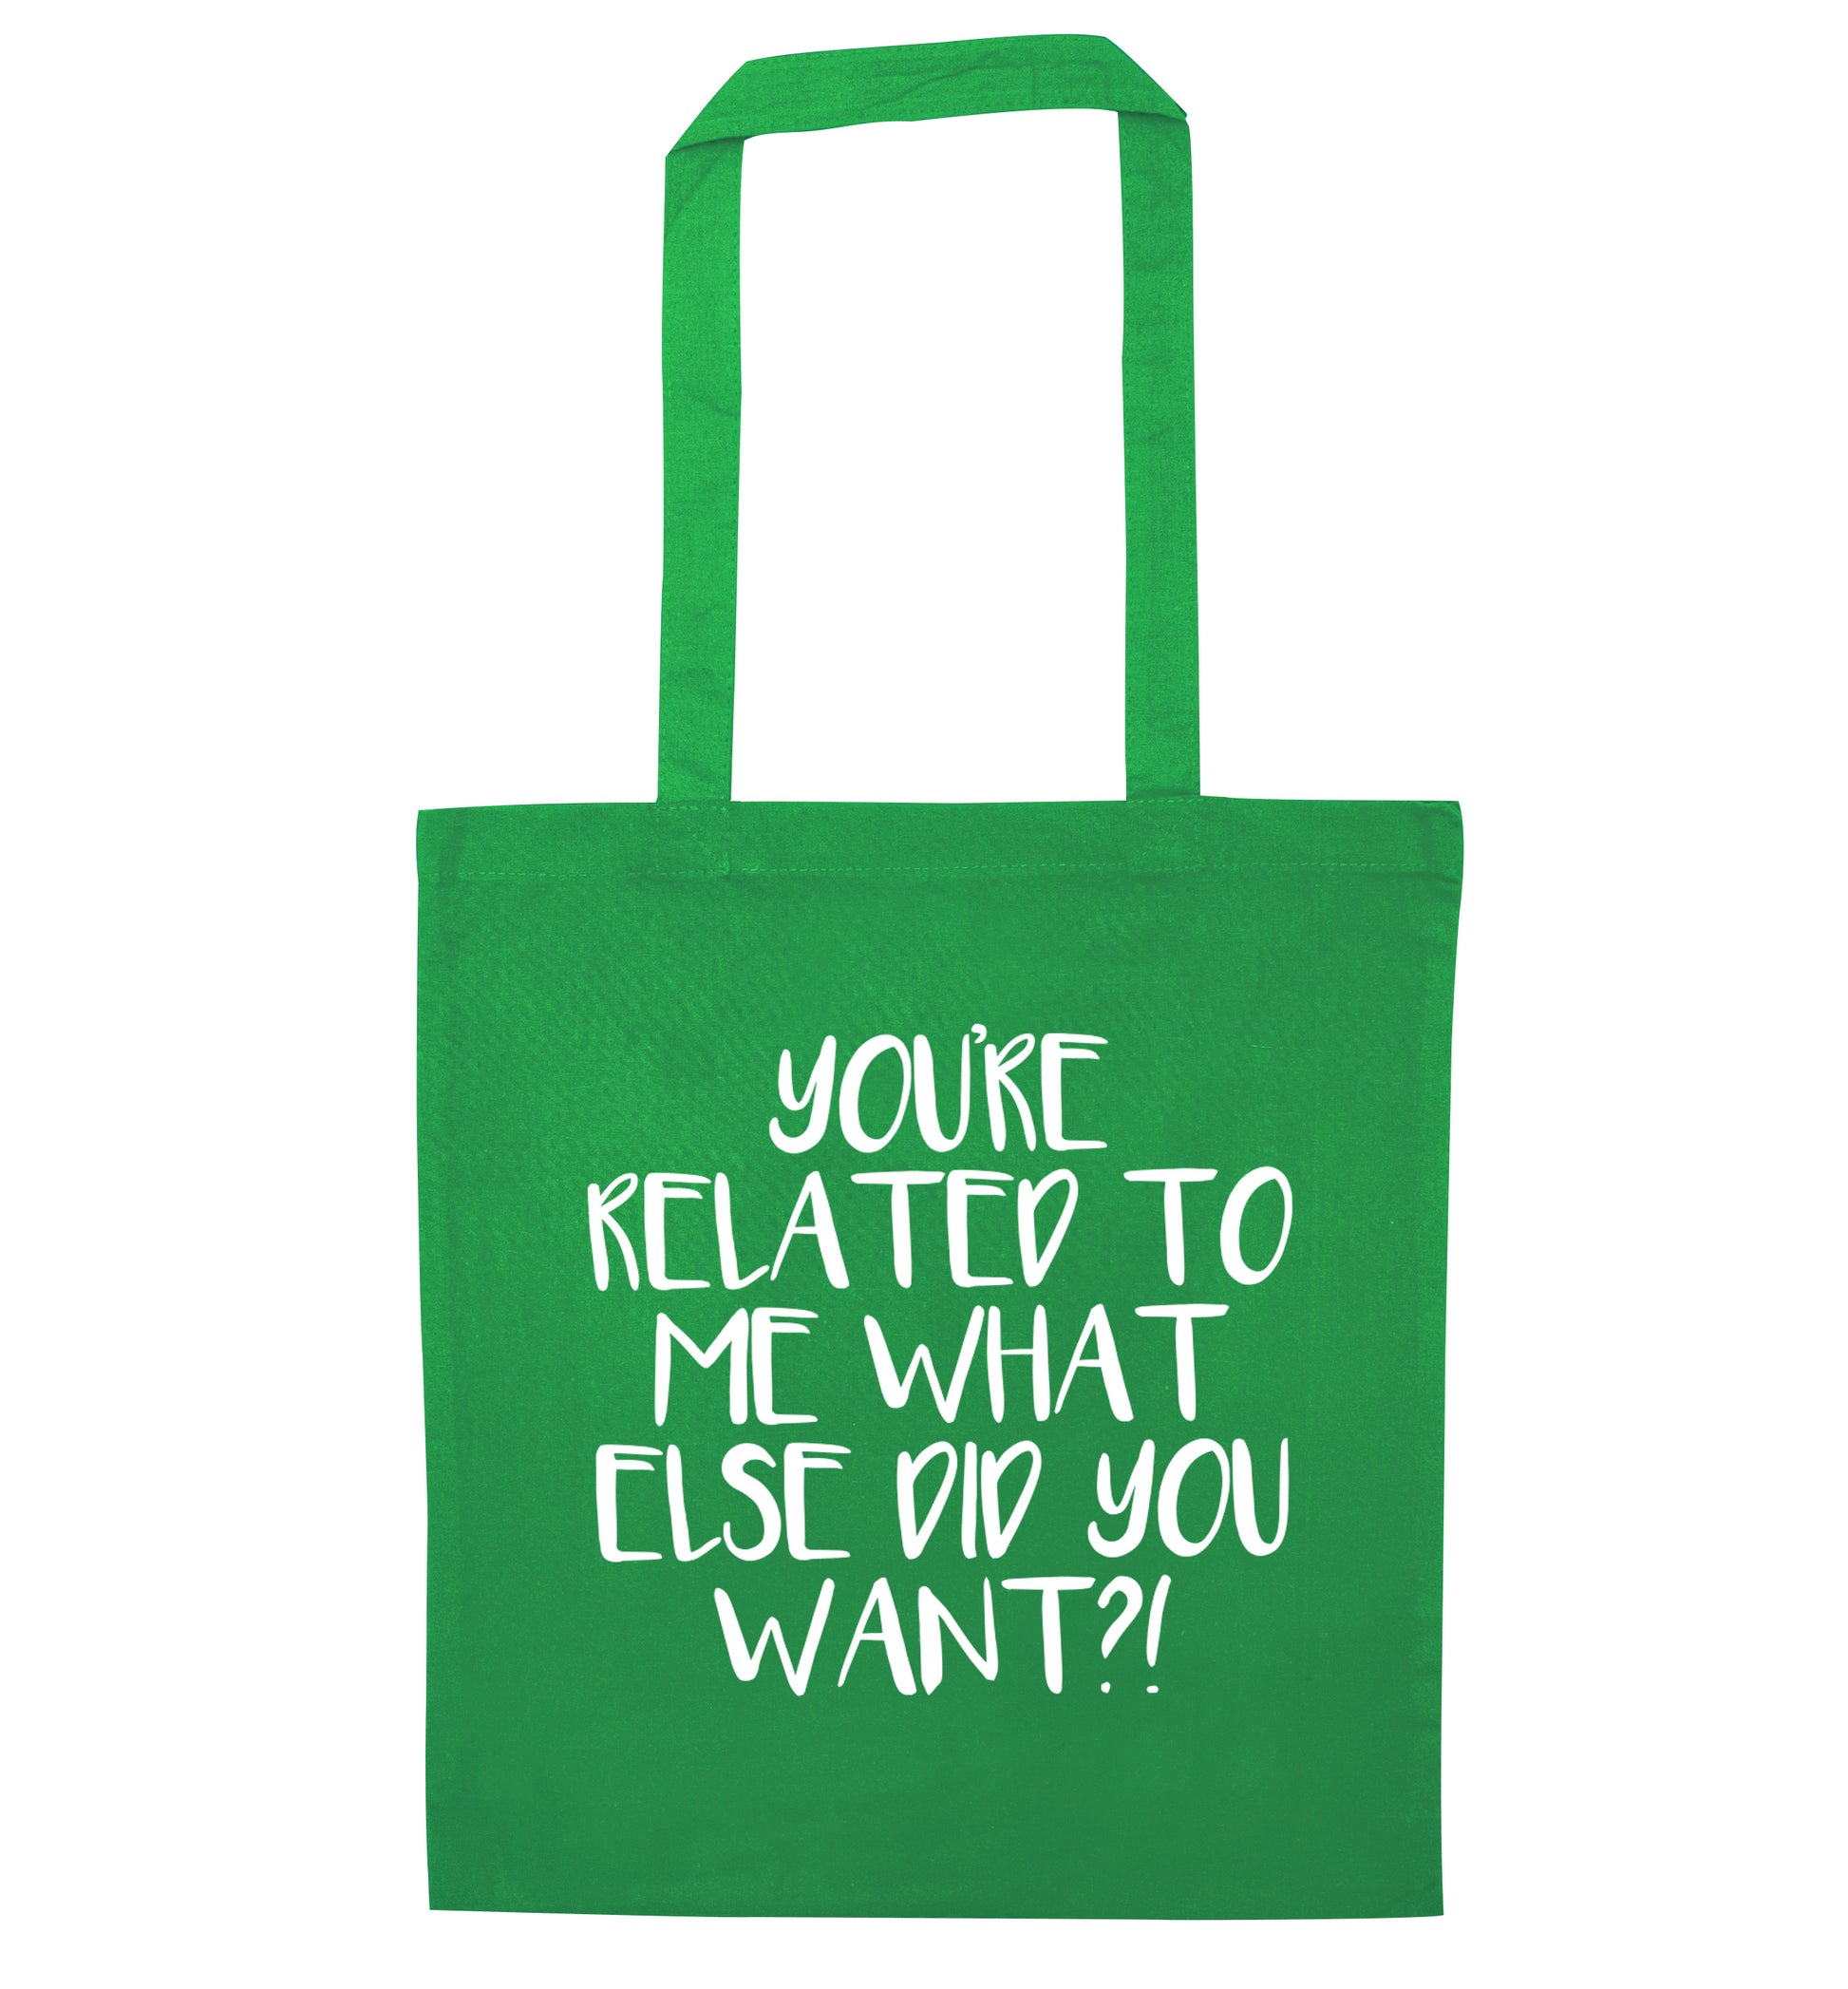 You're related to me what more do you want? green tote bag